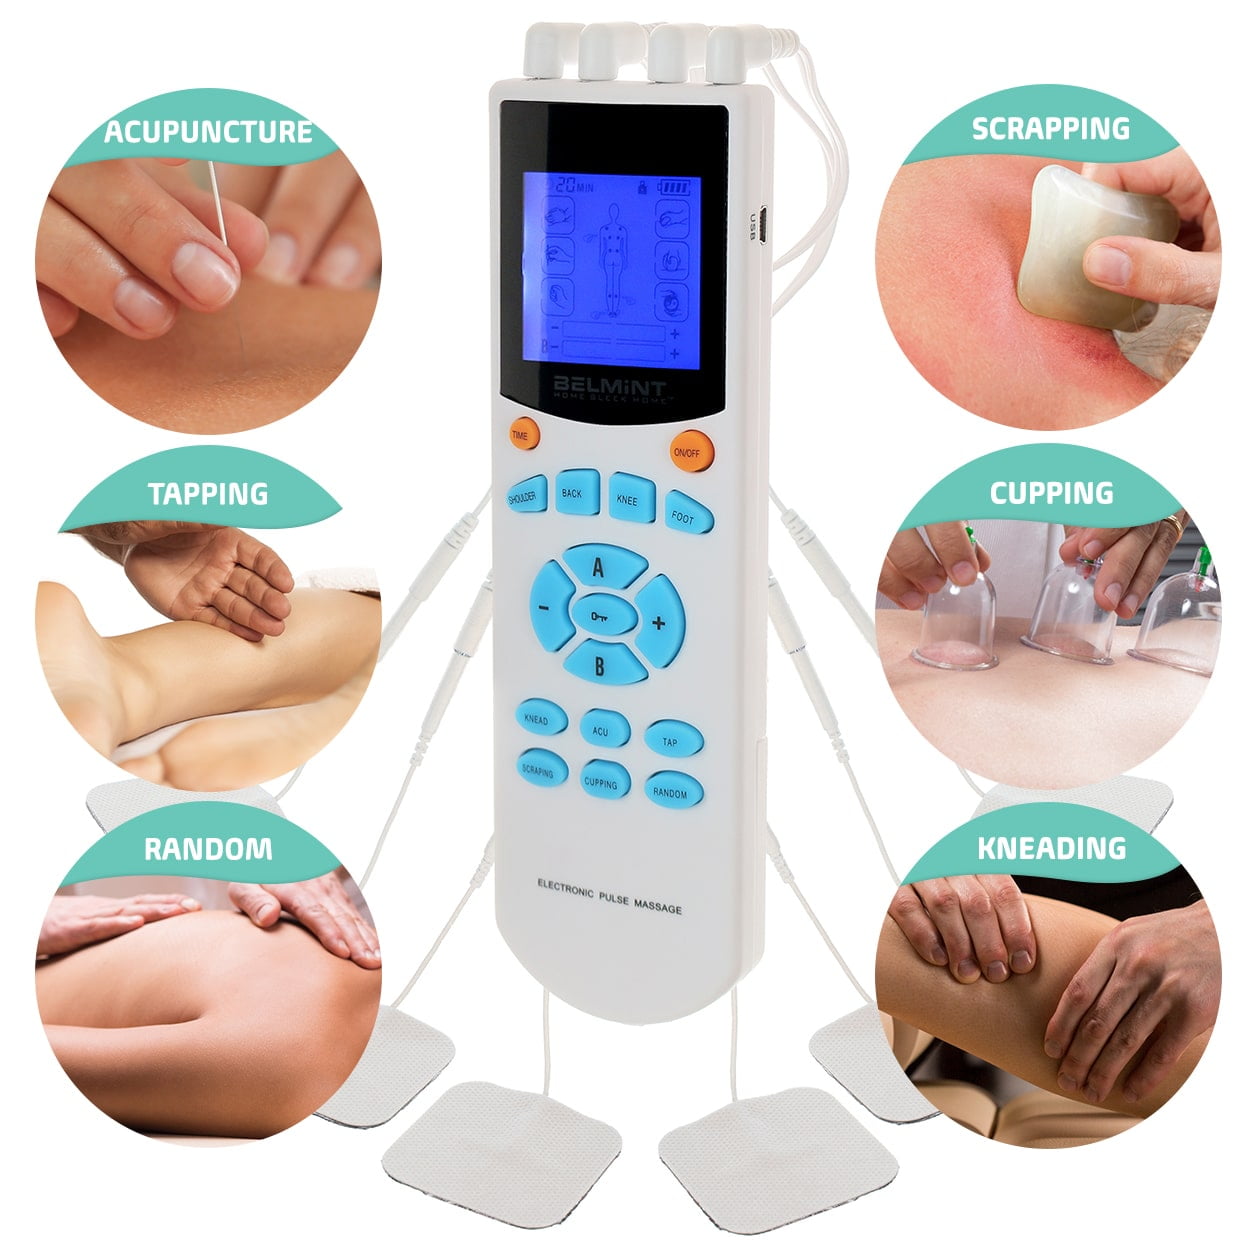 MazaLief TENS Unit Electronic Pulse Massager for Full Body Relief Therapy -  Vysta Health